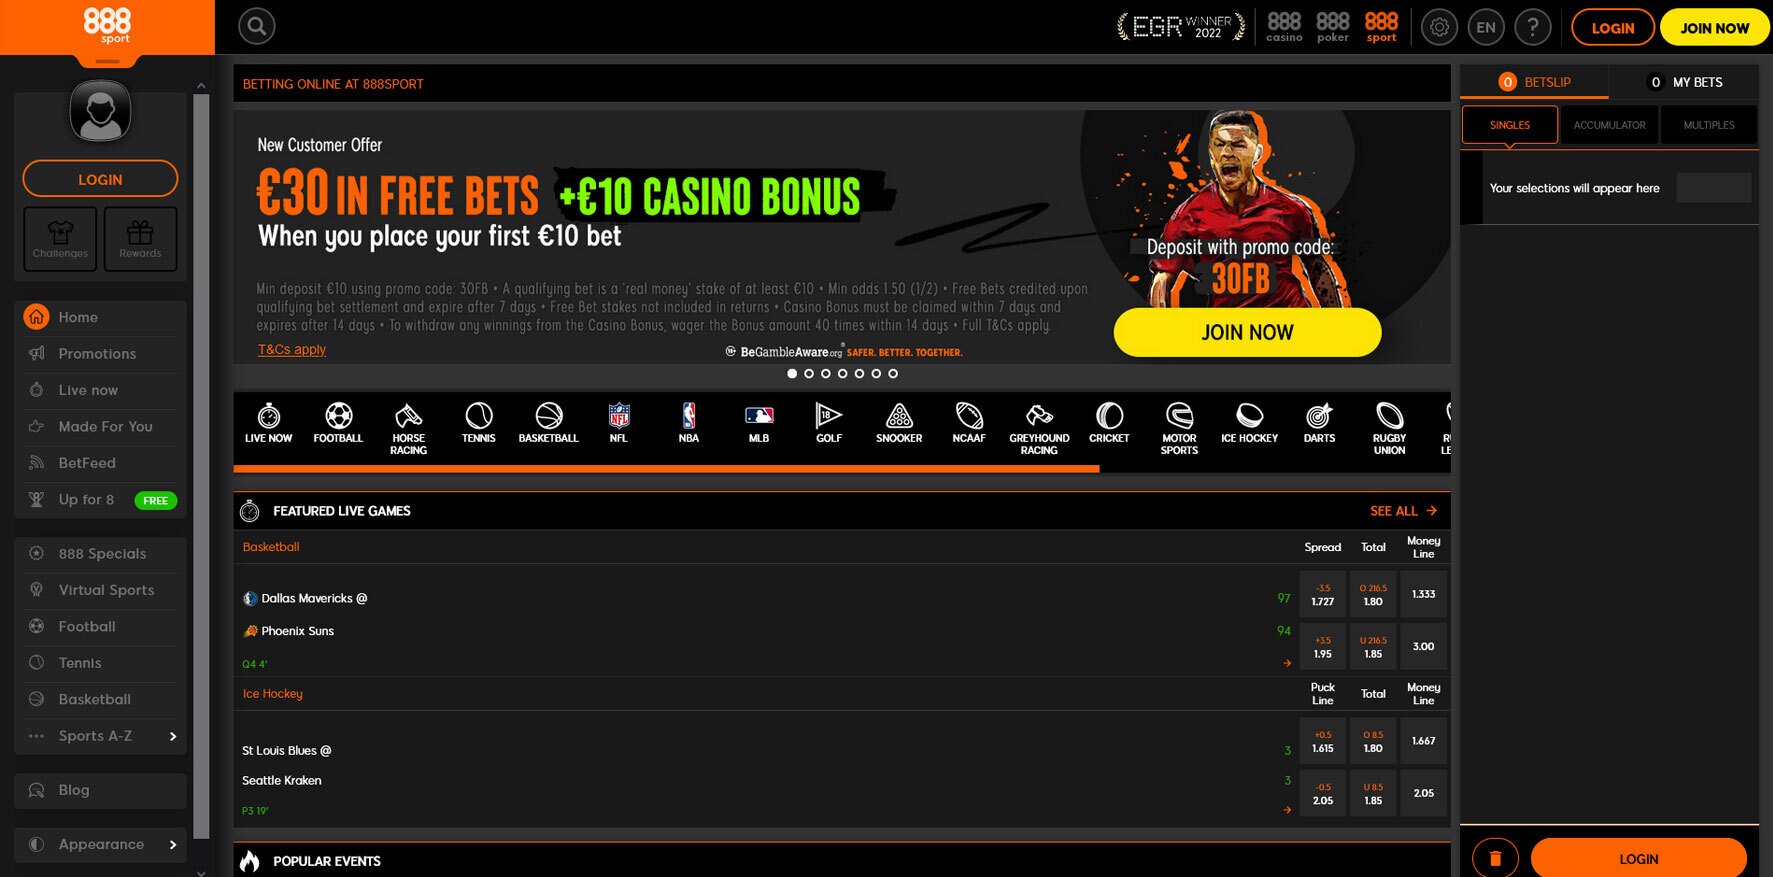 888 Sport: The Casino Site That Offers The Best Experience For Indian Players